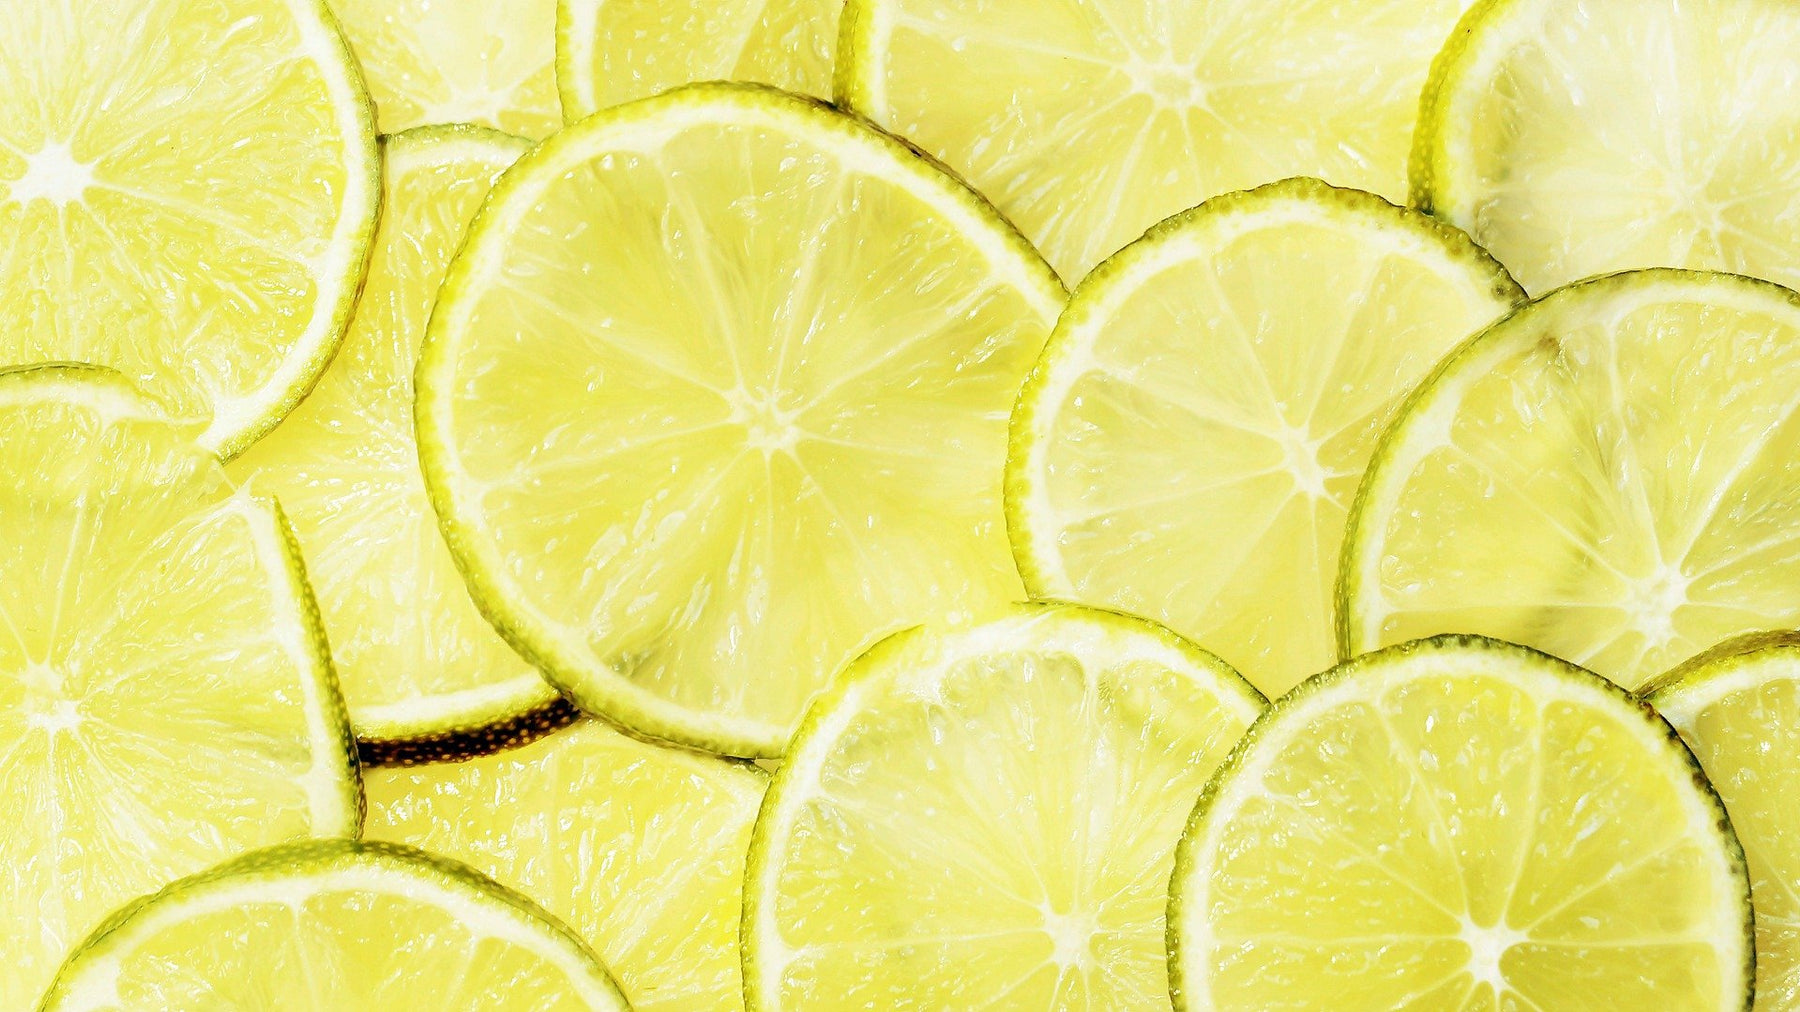 Slices of lime covering the whole image